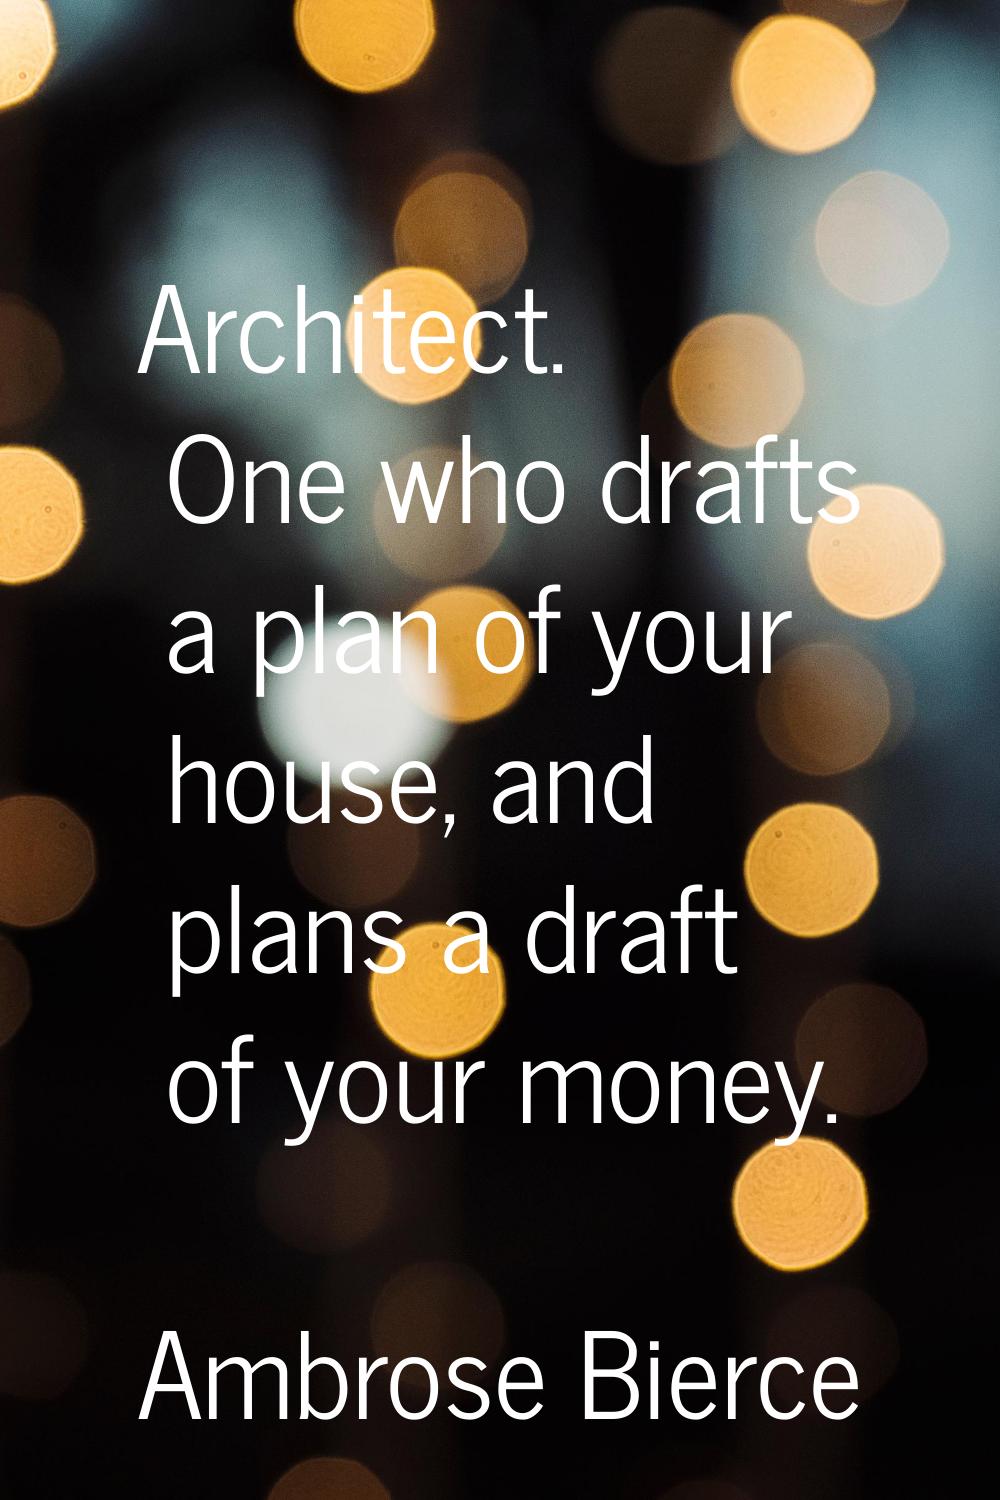 Architect. One who drafts a plan of your house, and plans a draft of your money.